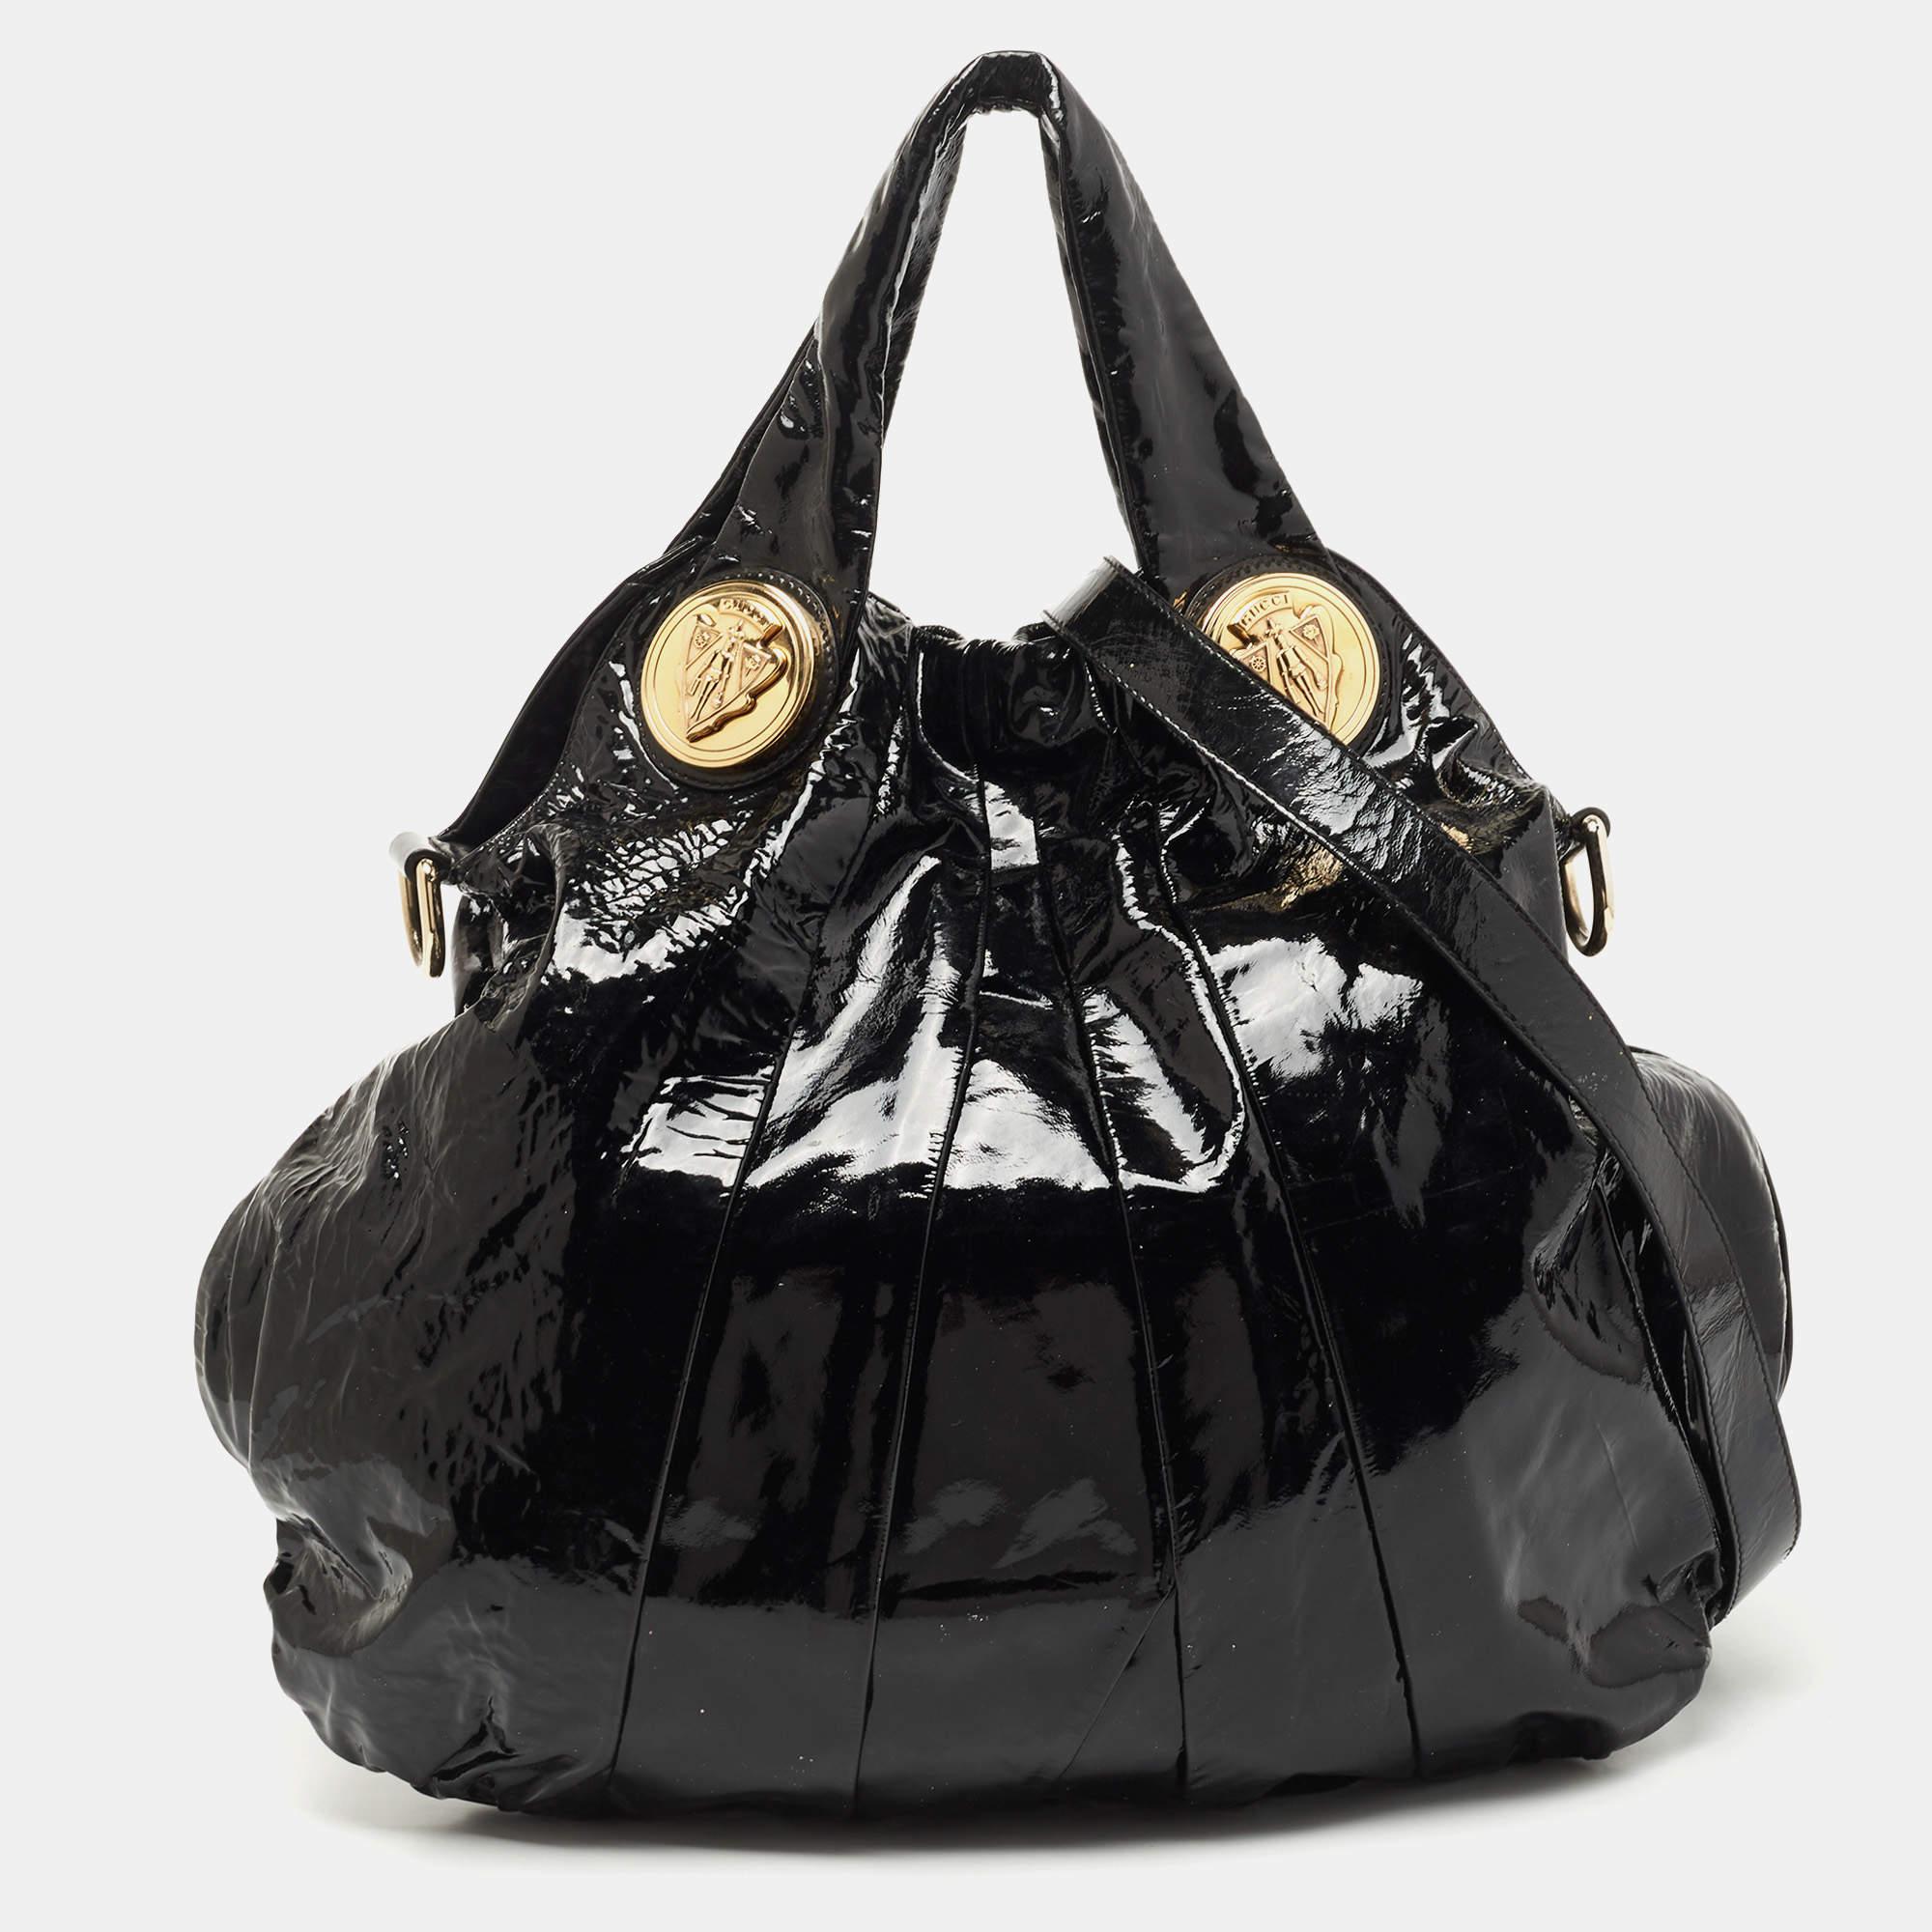 Introduced in 2008, the Gucci Hysteria is loved and admired by style enthusiasts all around the world. The nylon interior of this hobo is spaciously sized to keep your daily belongings safe. Created from patent leather, the Gucci crest accents on